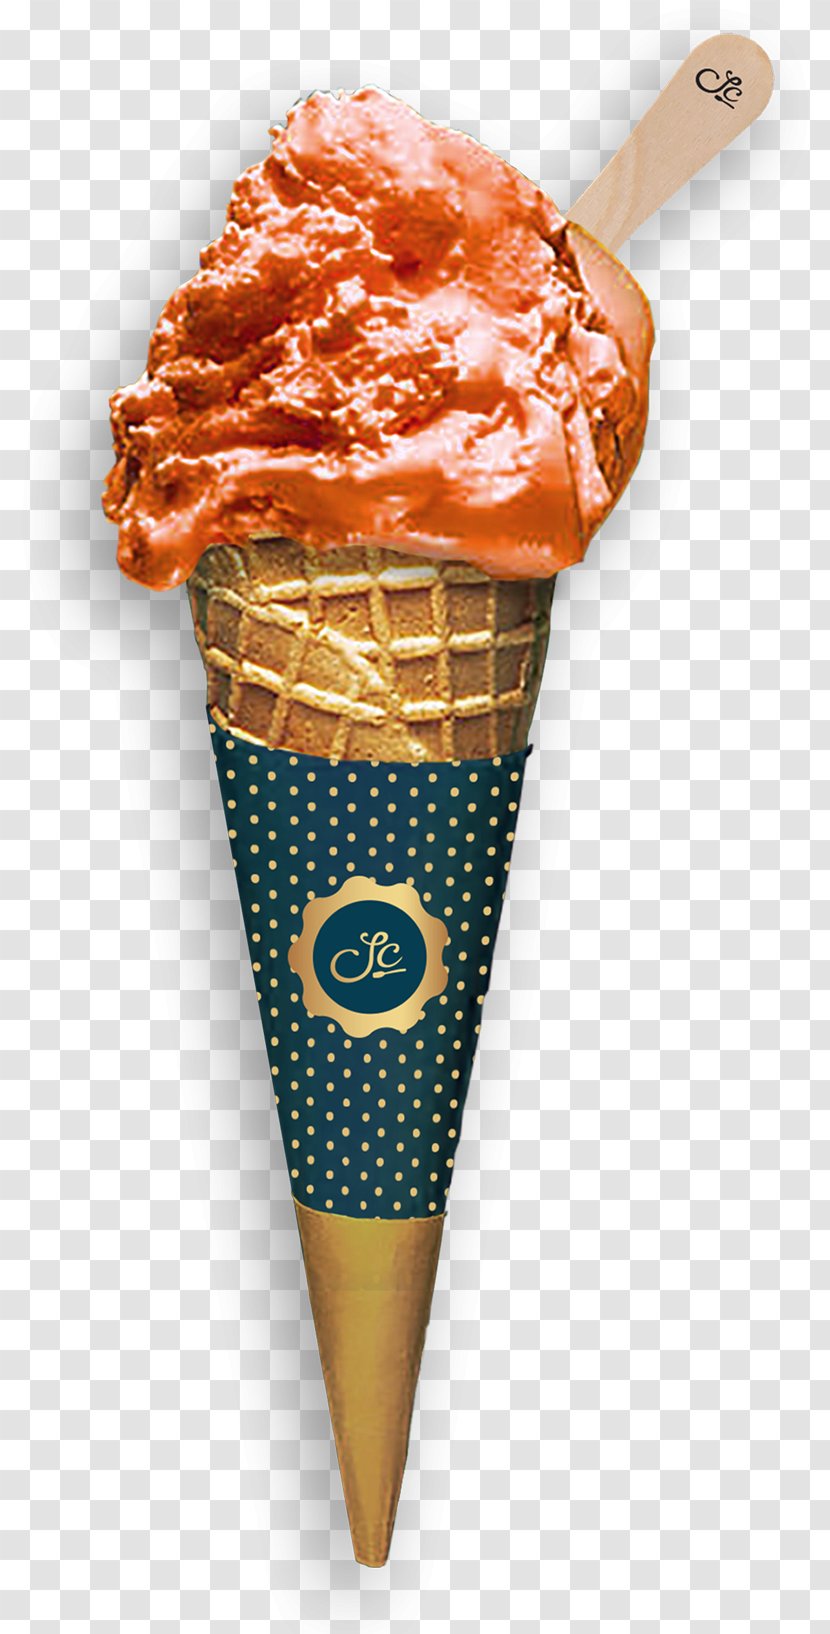 Southern Charm Gelato Shoppe Chocolate Ice Cream Cones - Brand Transparent PNG